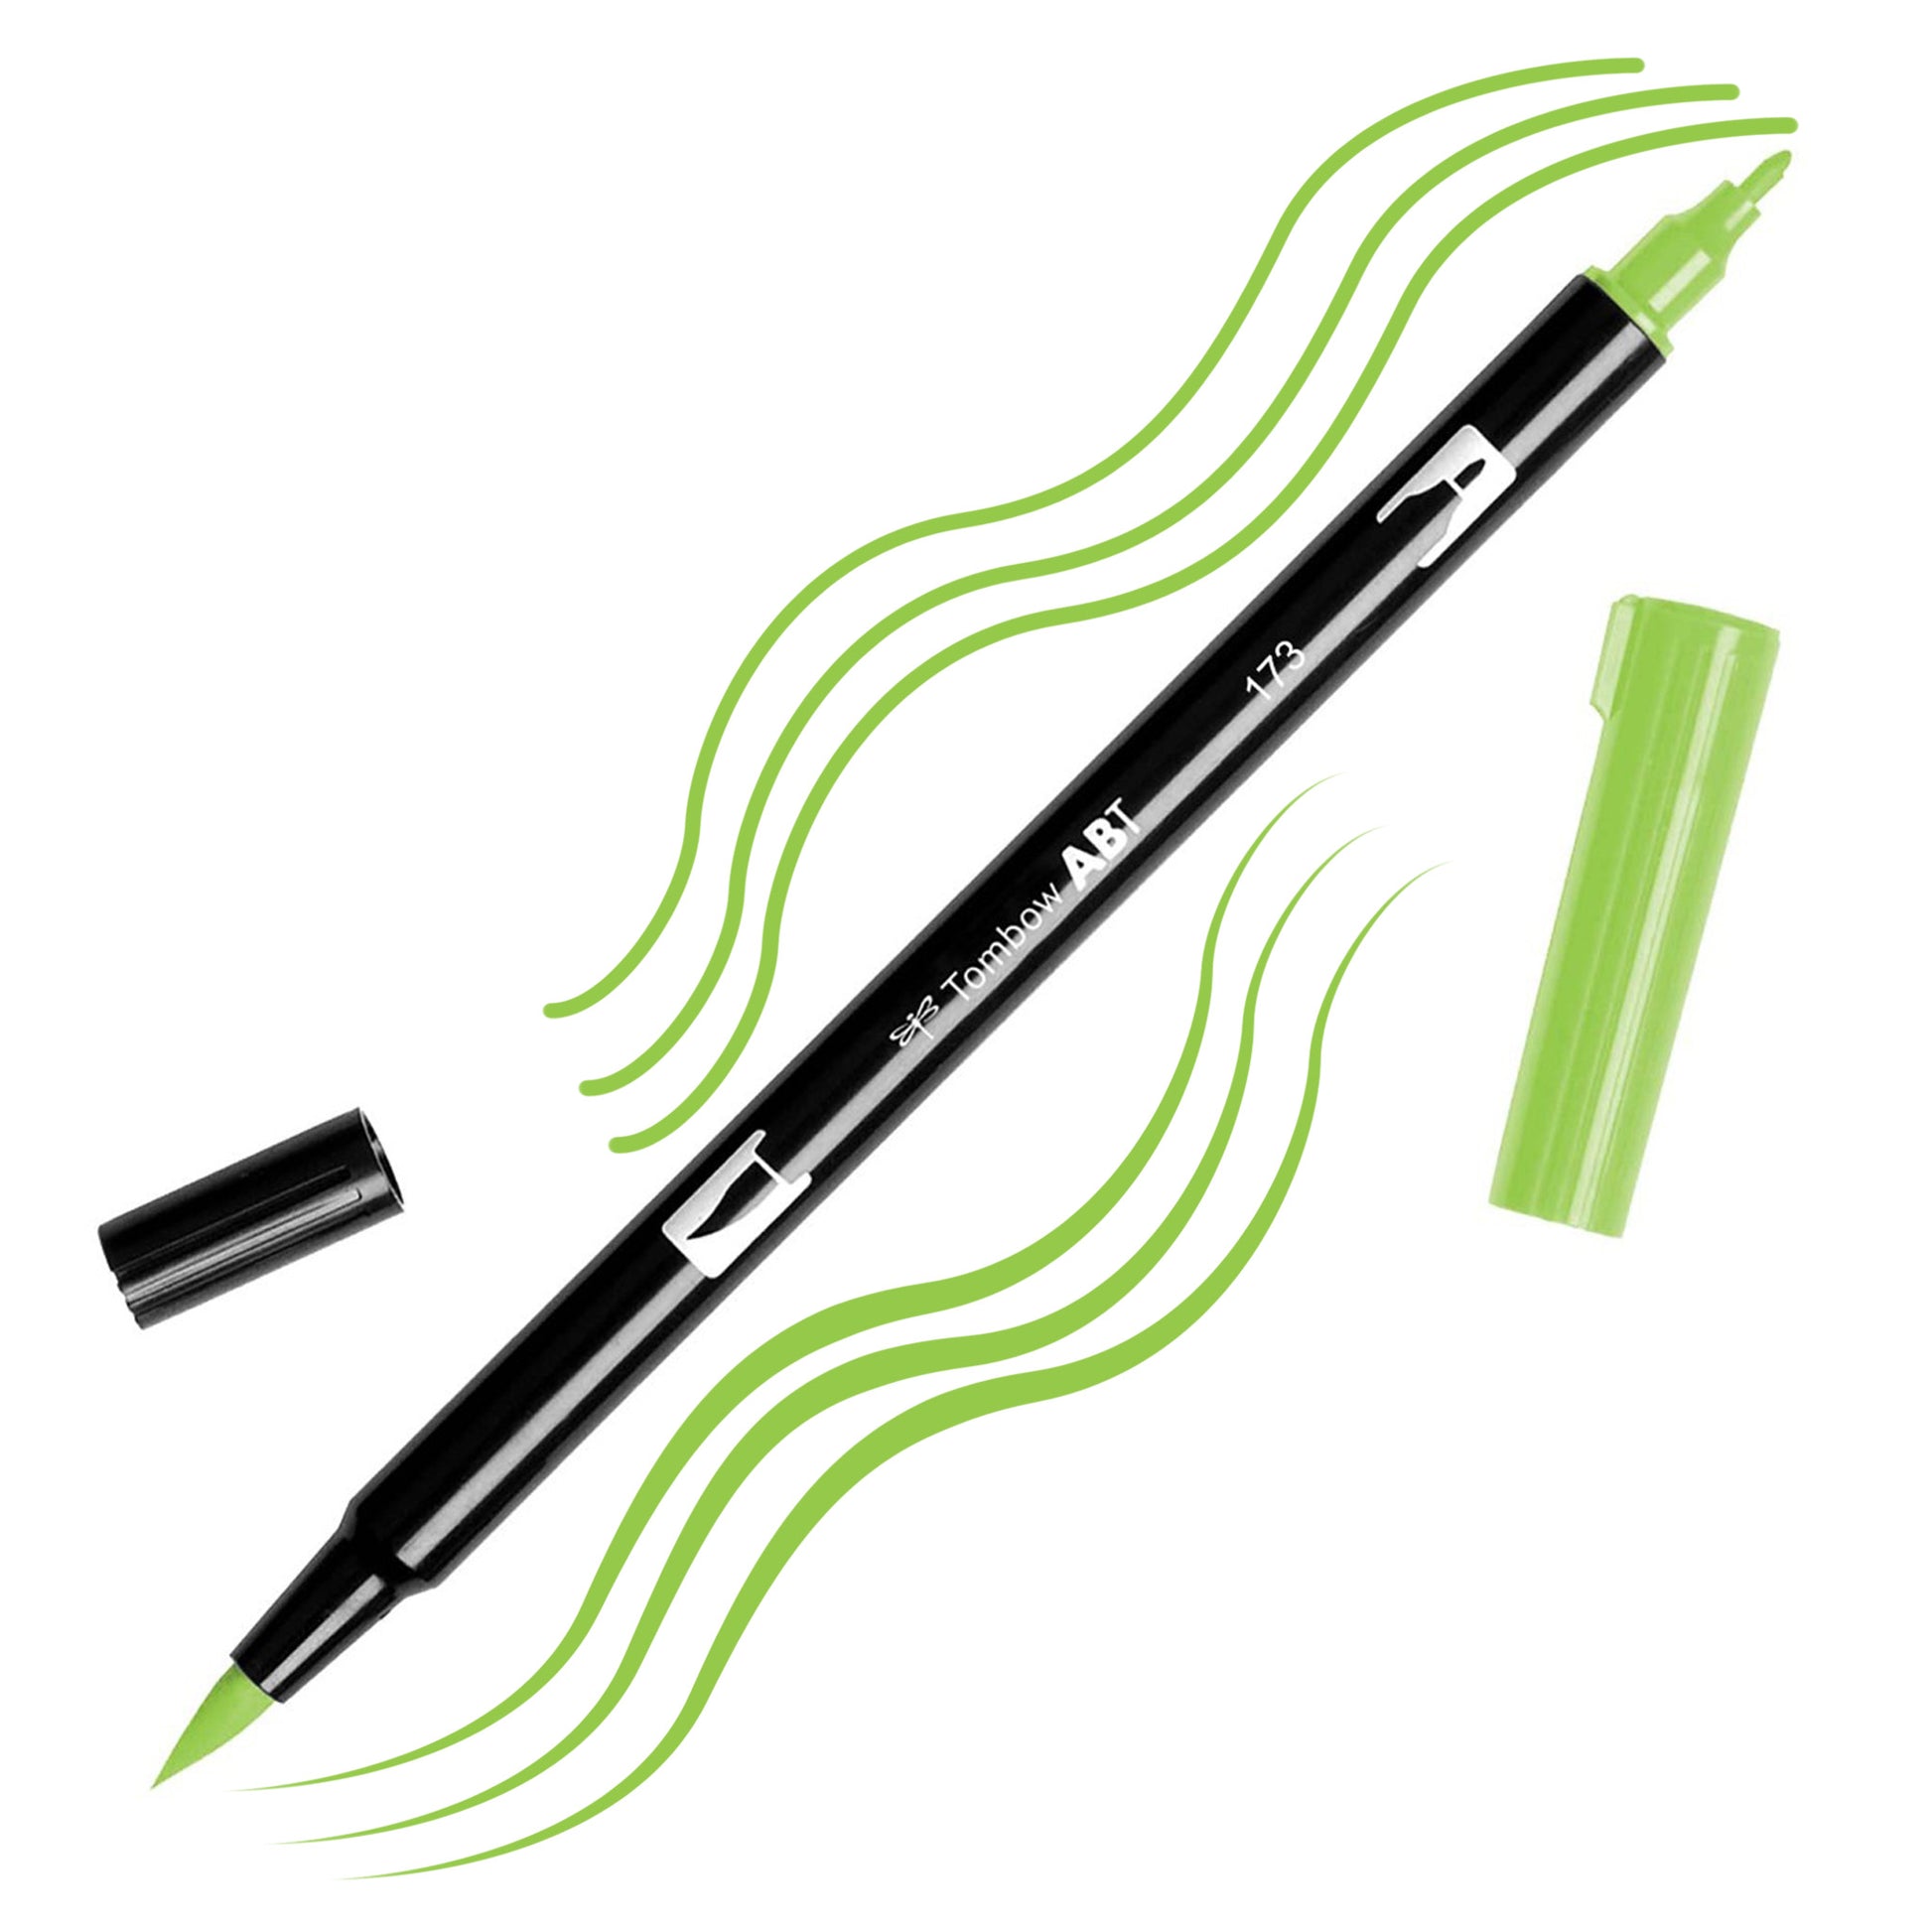 Willow Green Tombow double-headed brush-pen with a flexible nylon fiber brush tip and a fine tip against a white background with Willow Green strokes